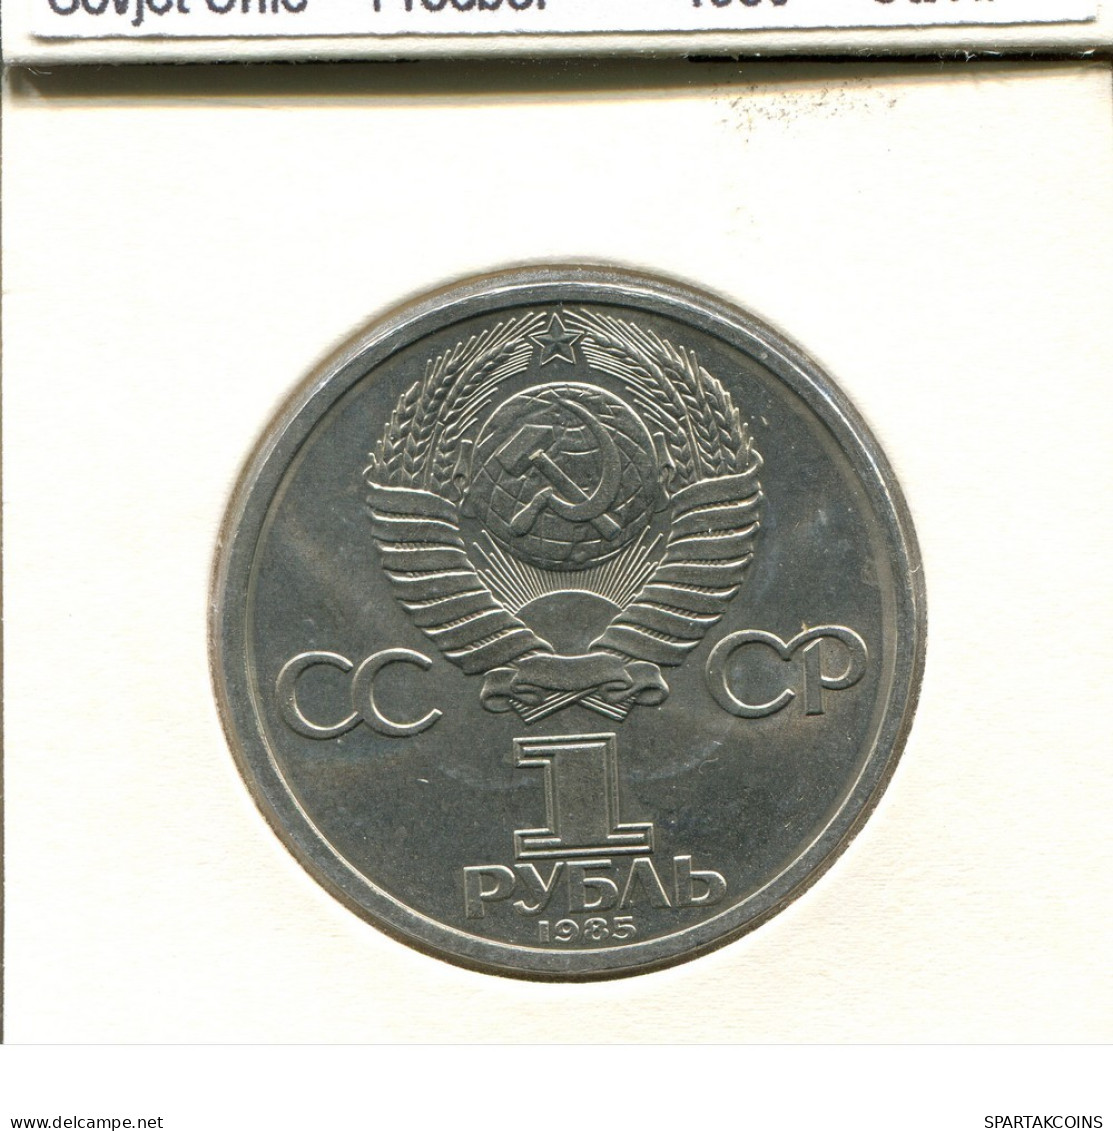 1 ROUBLE 1985 RUSSLAND RUSSIA USSR Münze #AS665.D.A - Russia